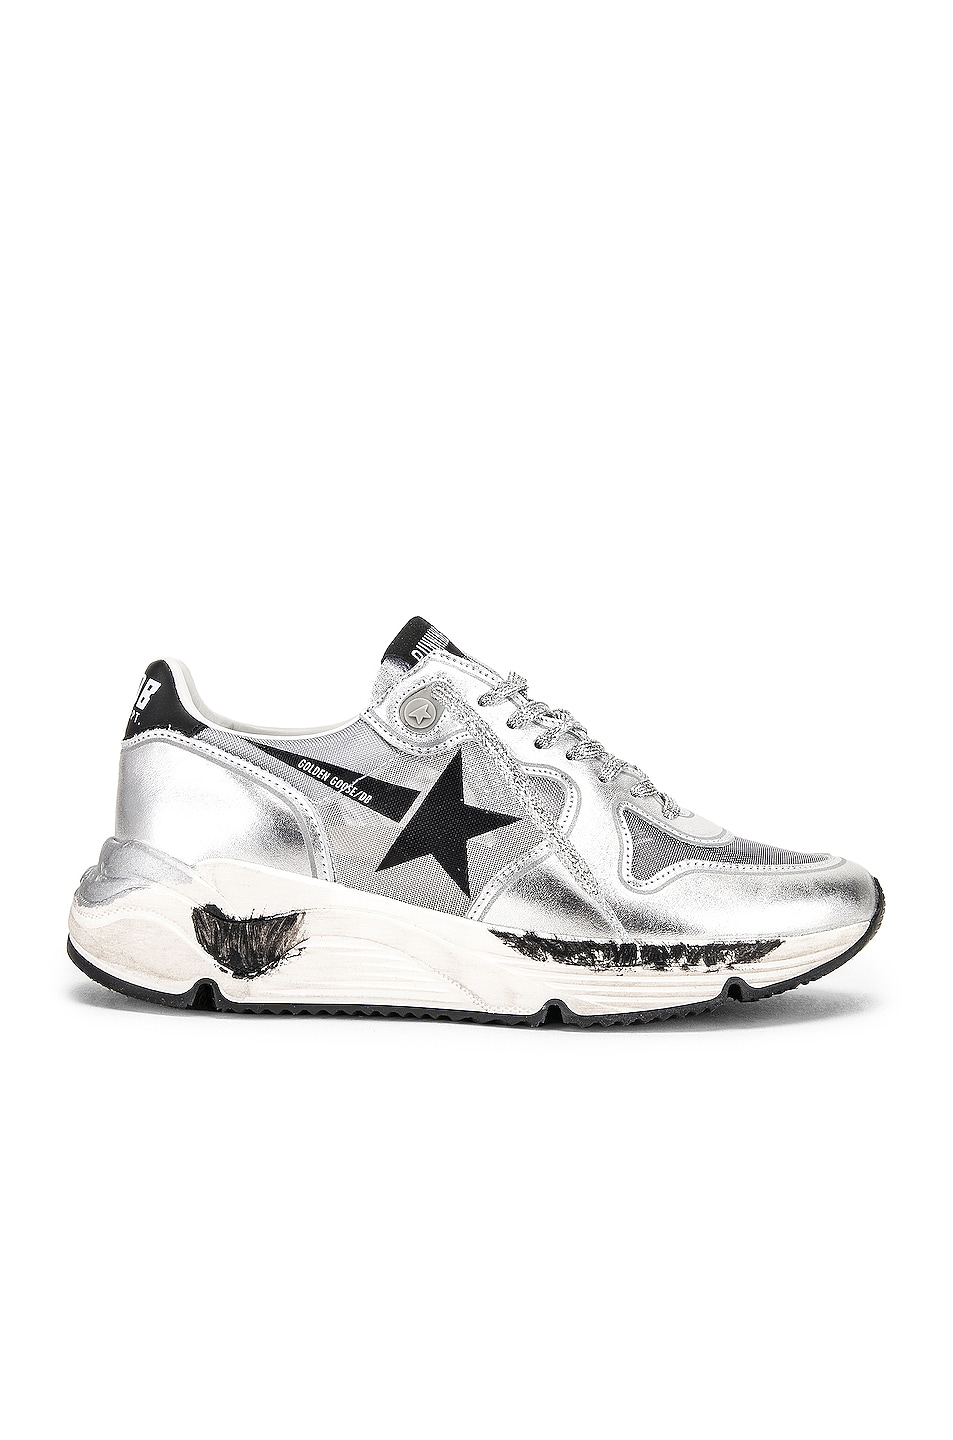 Image 1 of Golden Goose Running Sole Sneakers in Silver Net & Black Star